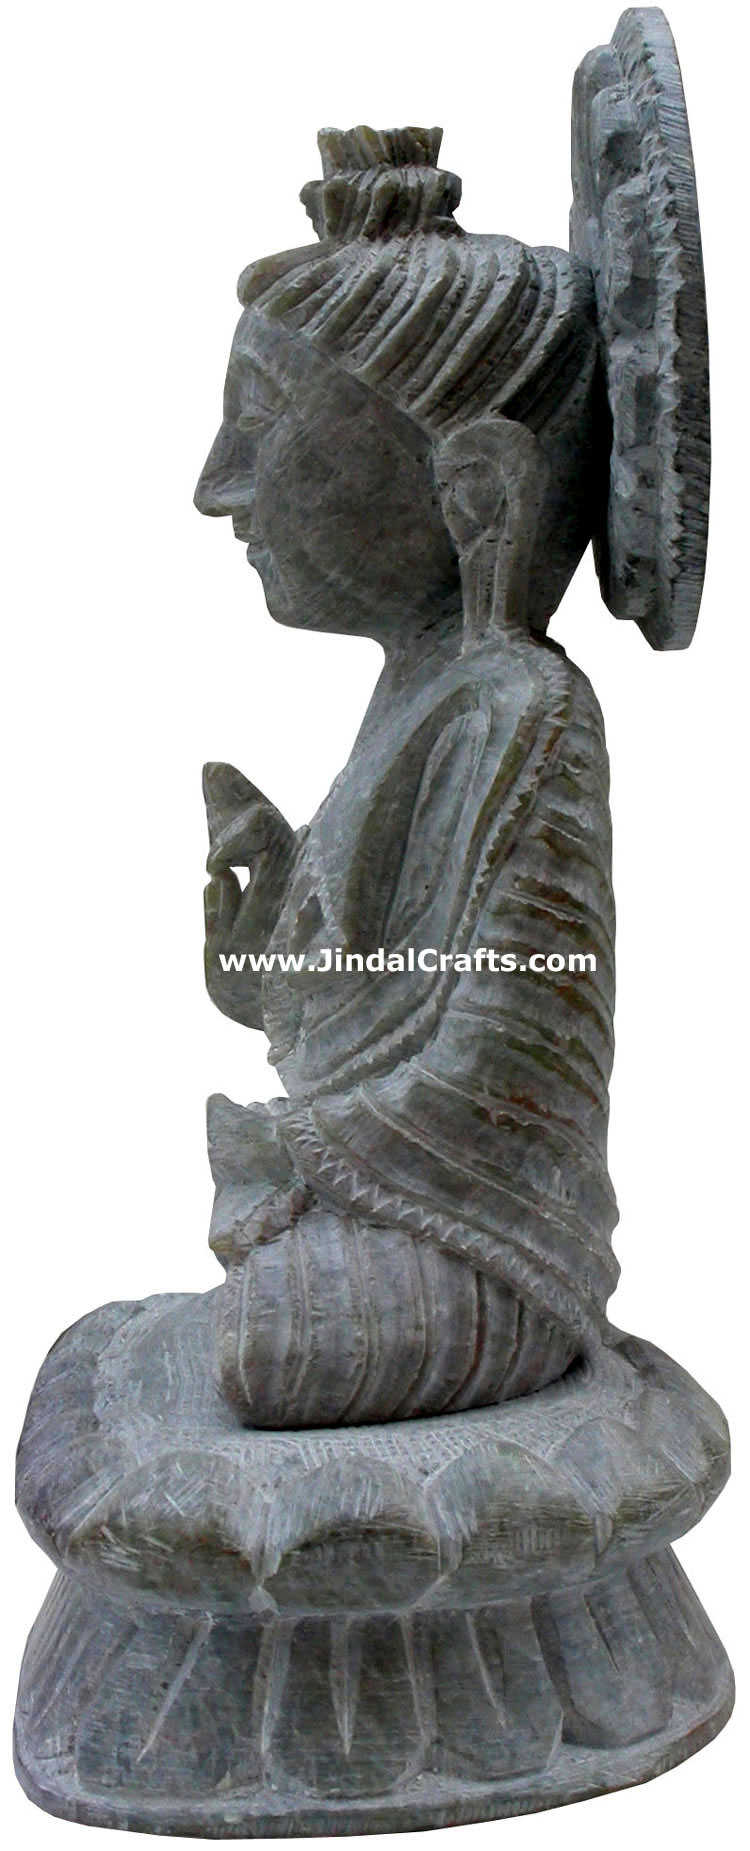 Lord Buddha Hand Carved Stone Sculpture Indian Carving Artifact Figure Idol Arts